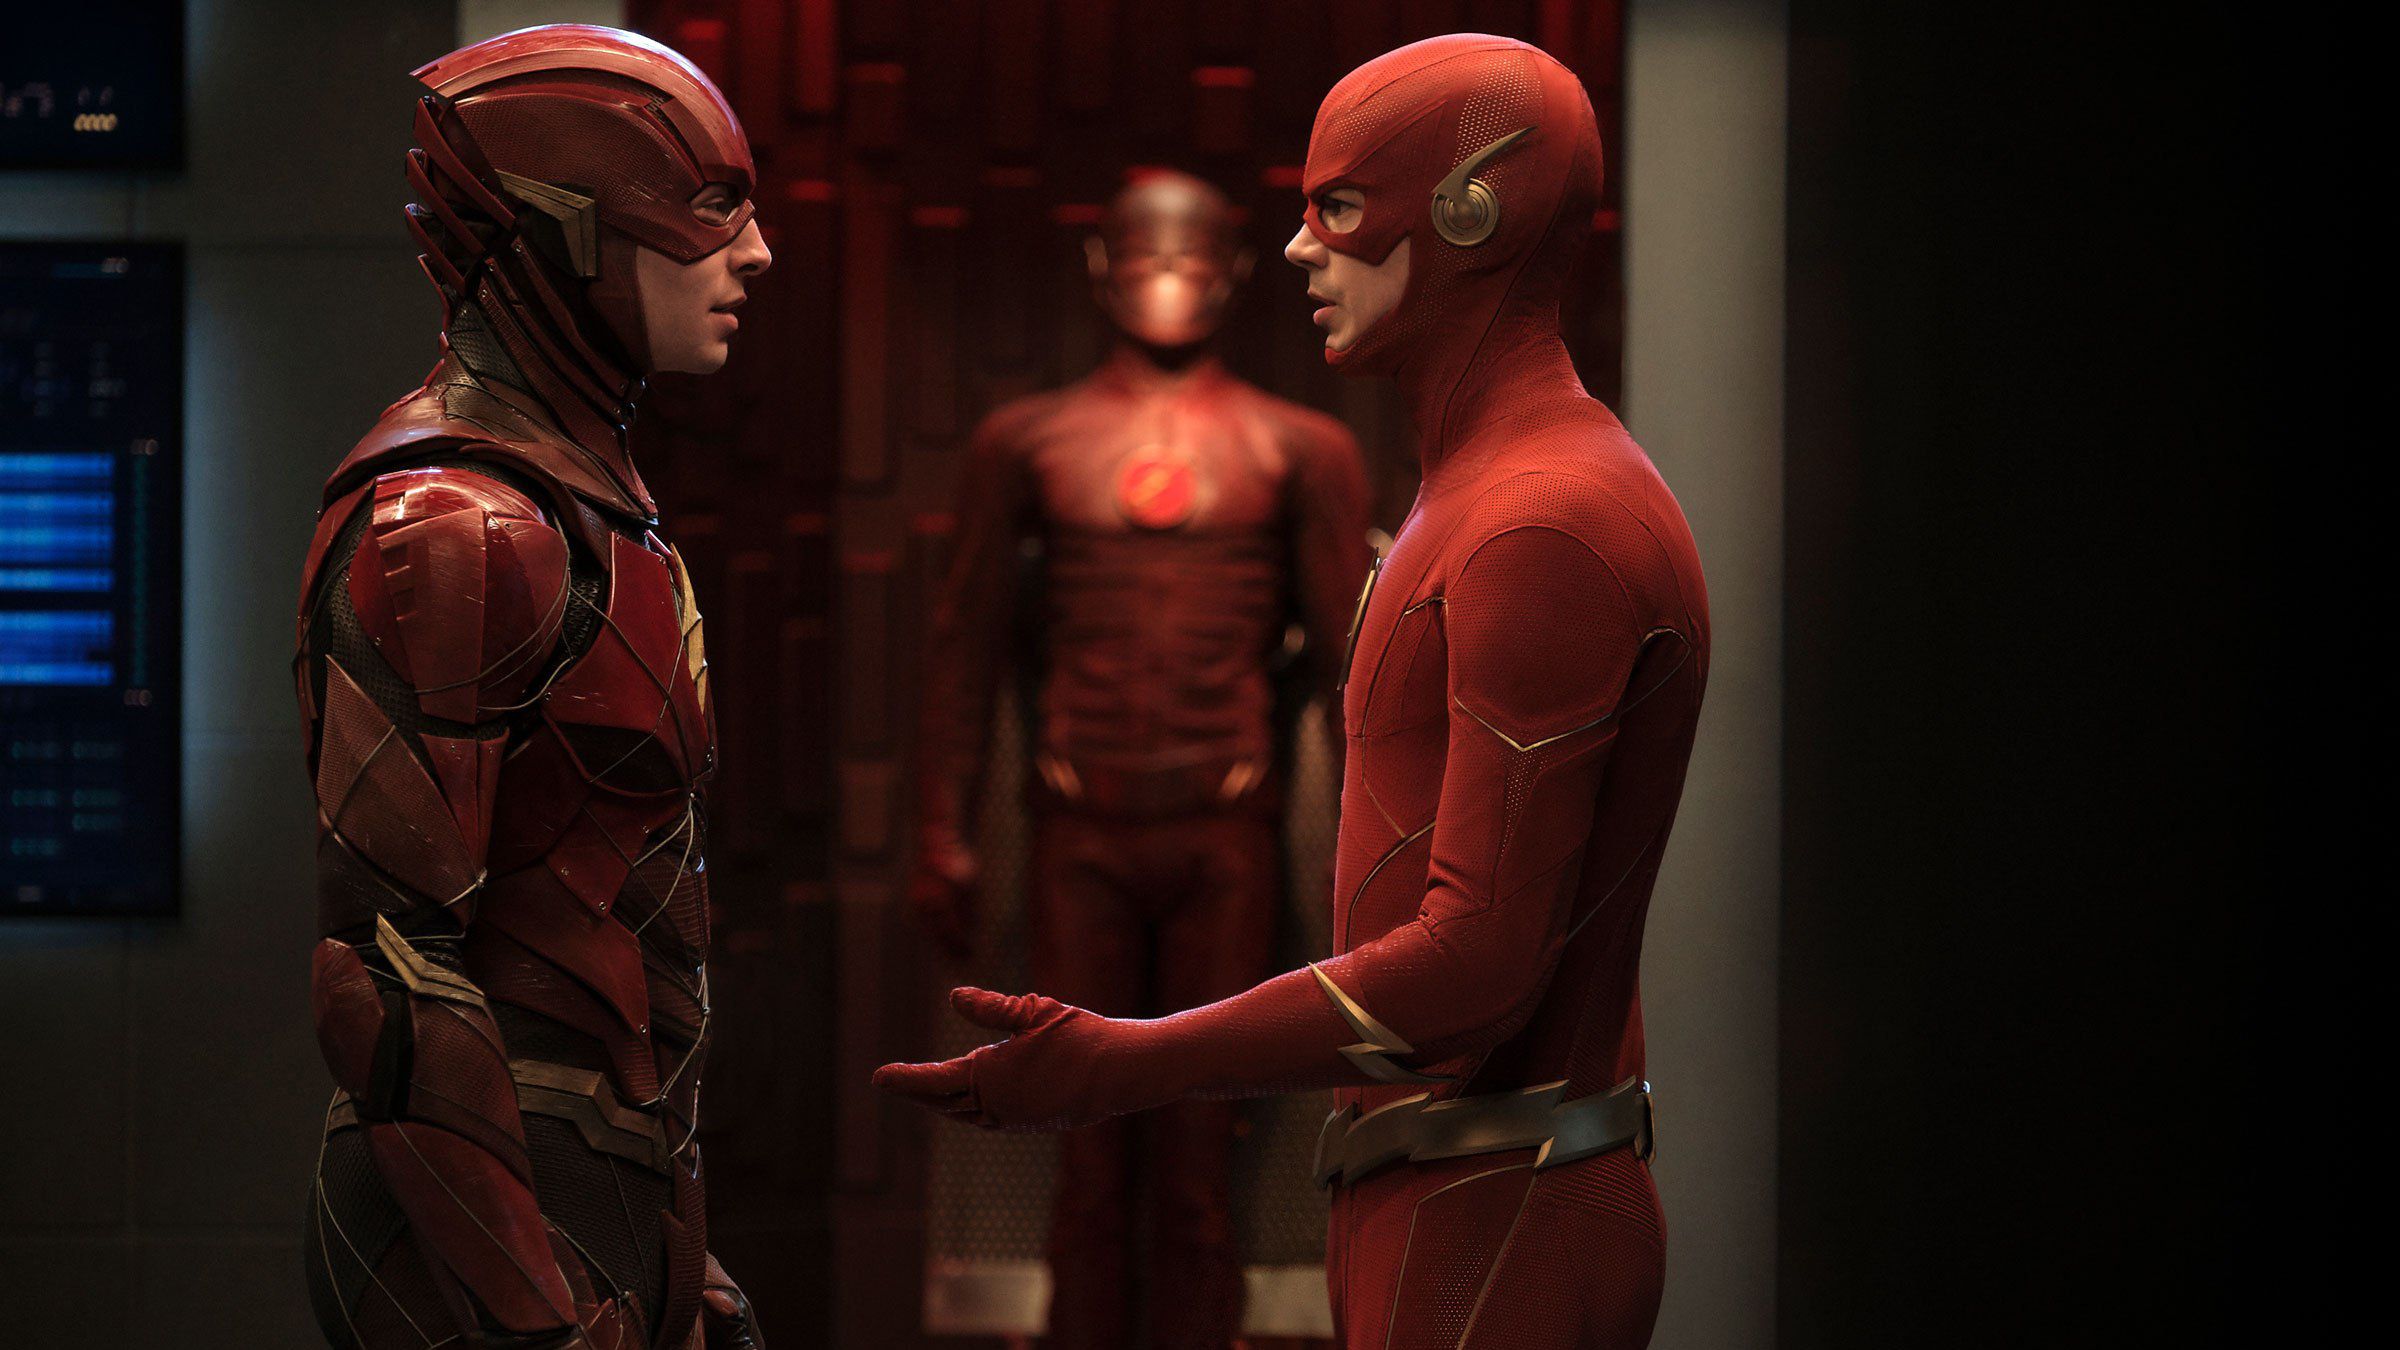 Ezra Miller As Flash Meets Barry Allen In Crisis On Infinite Earths, HD Tv Shows, 4k Wallpaper, Image, Background, Photo and Picture